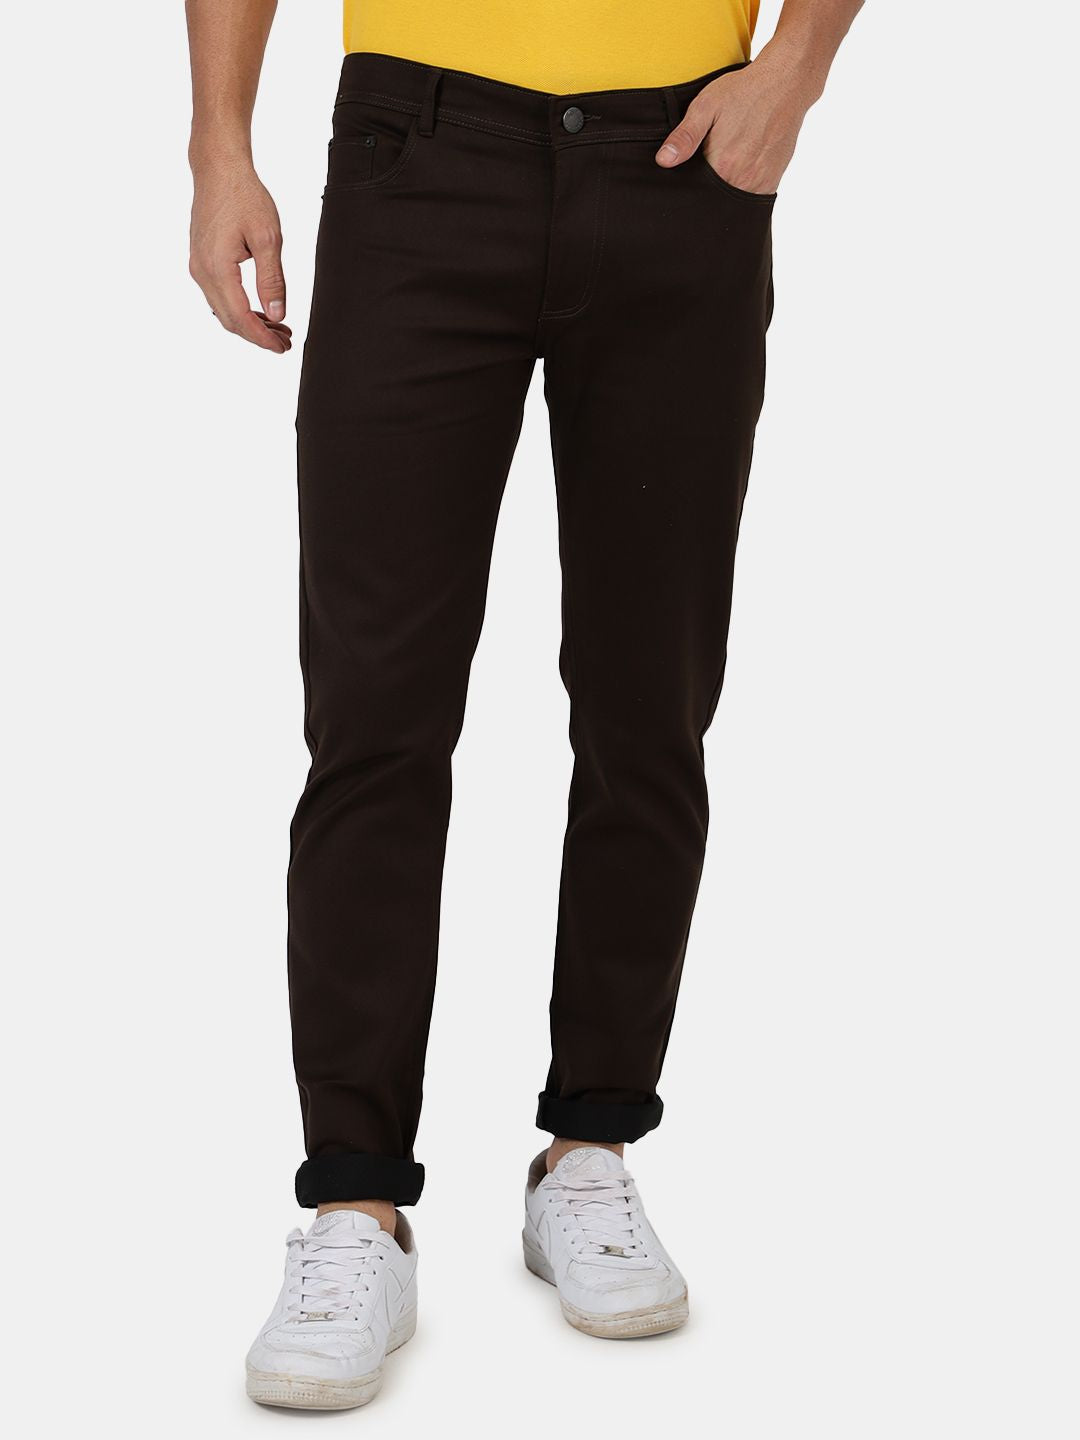 Slim fit flat front trouser Brown